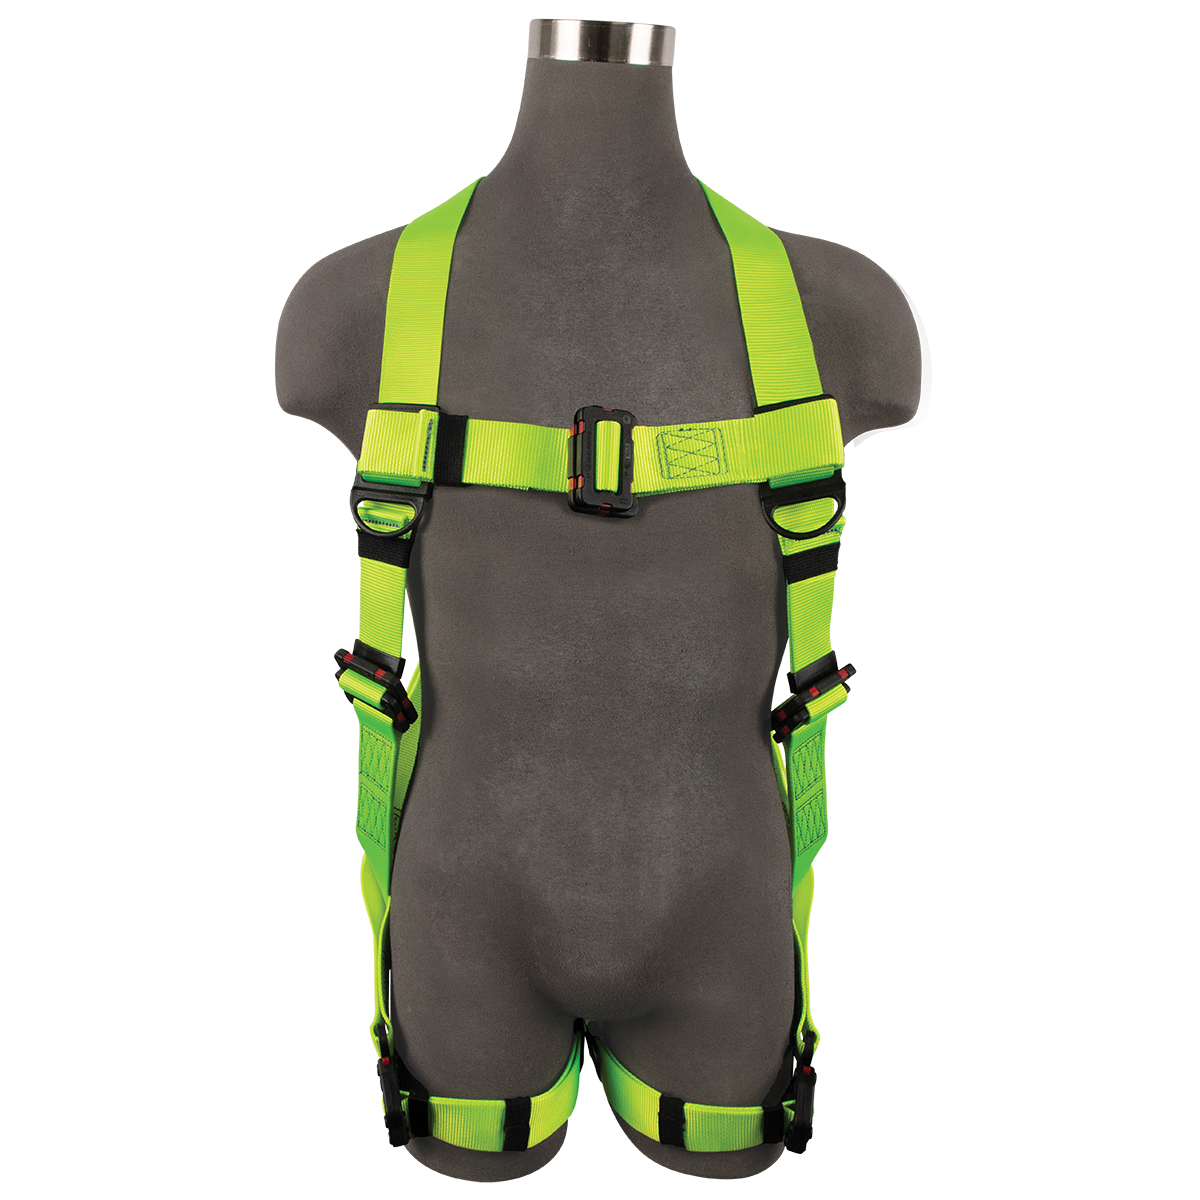 SAFEWAZE PRO+ Arc Flash Dielectric Harness with Pass through Dielectric on Chest and Quick-Connect Legs: L/XL